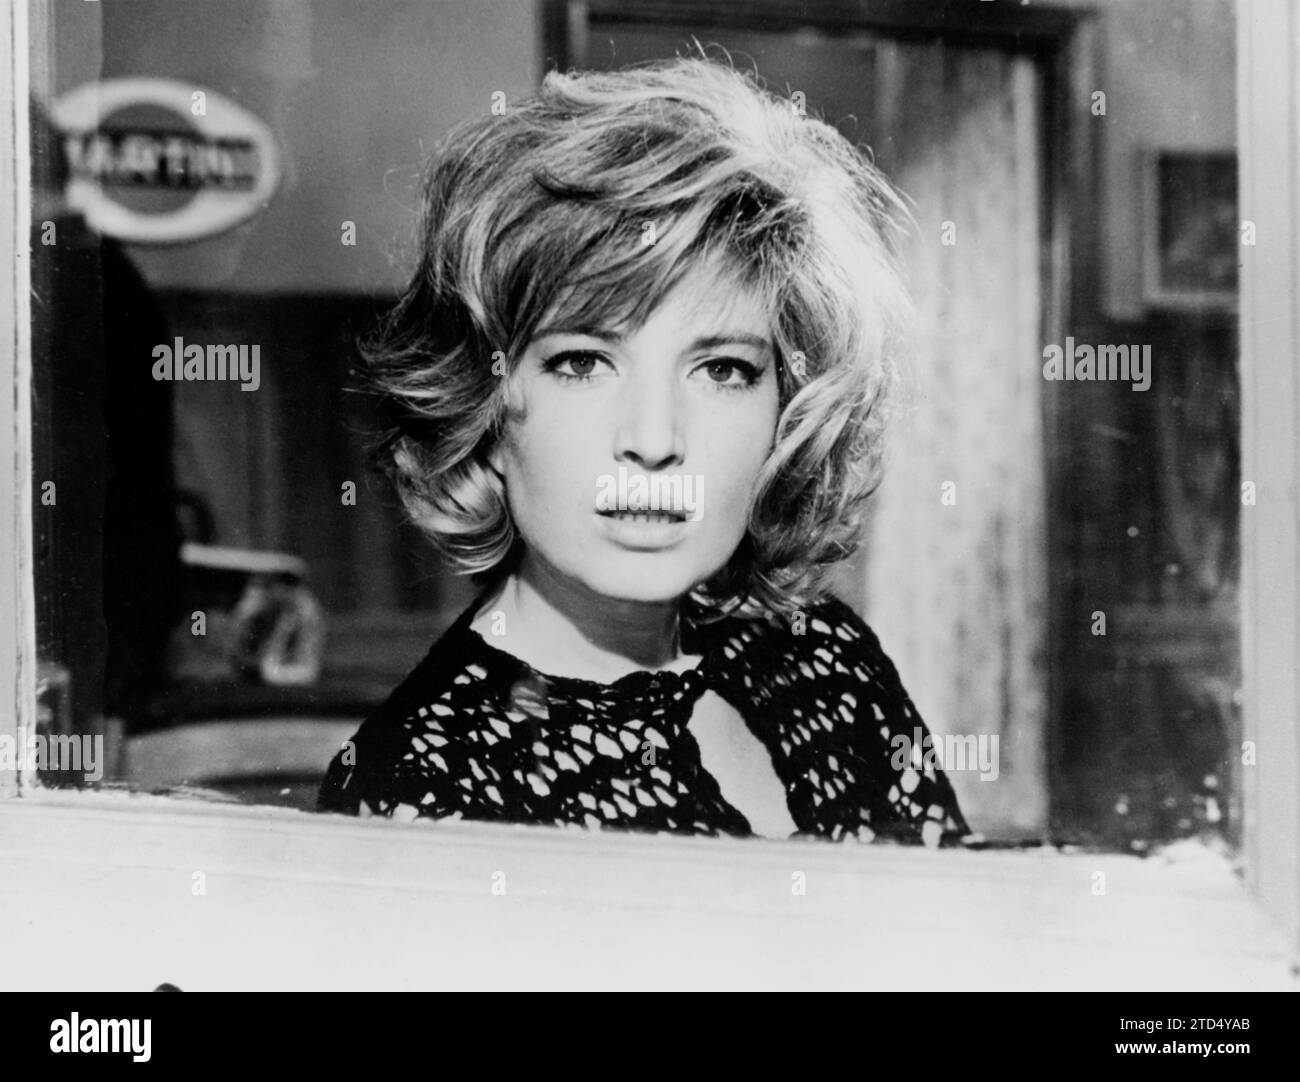 MONICA VITTI in episode THE SUPPER in the anthology film LE BAMBOLE / FOUR KINDS OF LOVE / THE DOLLS 1965 director FRANCO ROSSI Italy - France co-production Documento Film / Orsay Films / Gala Film Distributors (UK) Stock Photo